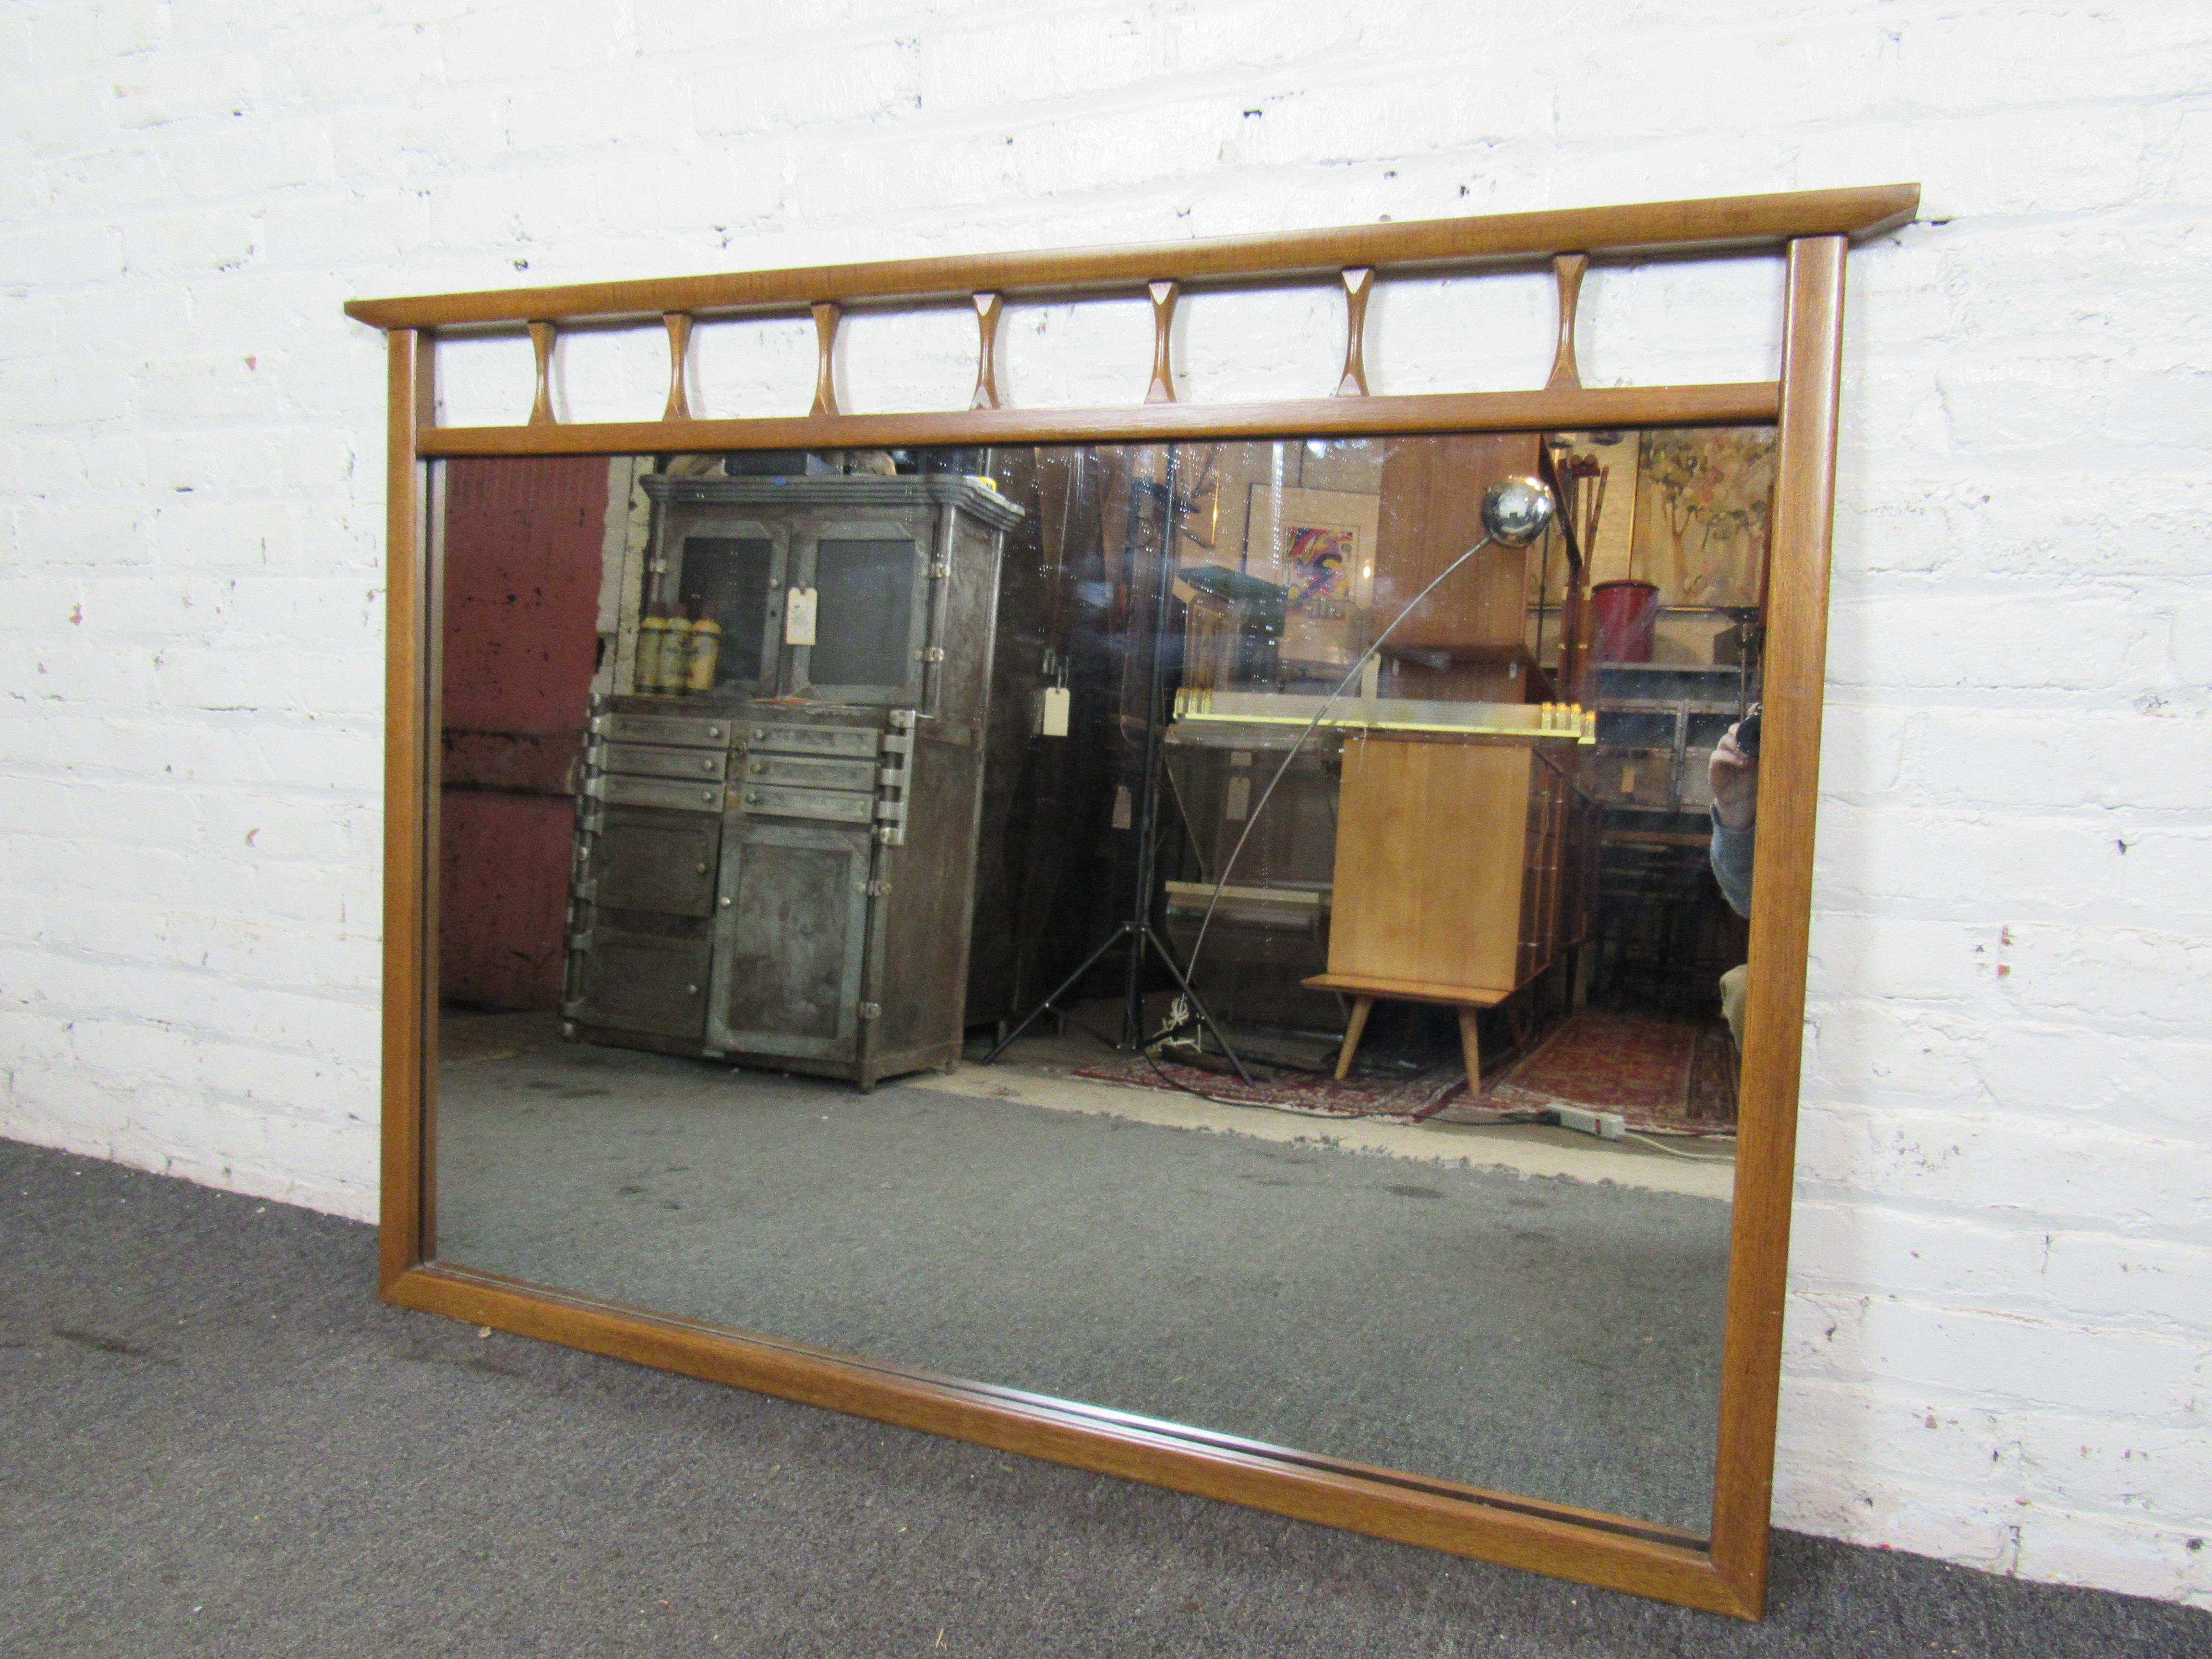 This large vintage wall mirror has a uniquely-sculpted wooden frame that can add a Mid-Century Modern touch to any space. Please confirm item location with seller (NY/NJ).